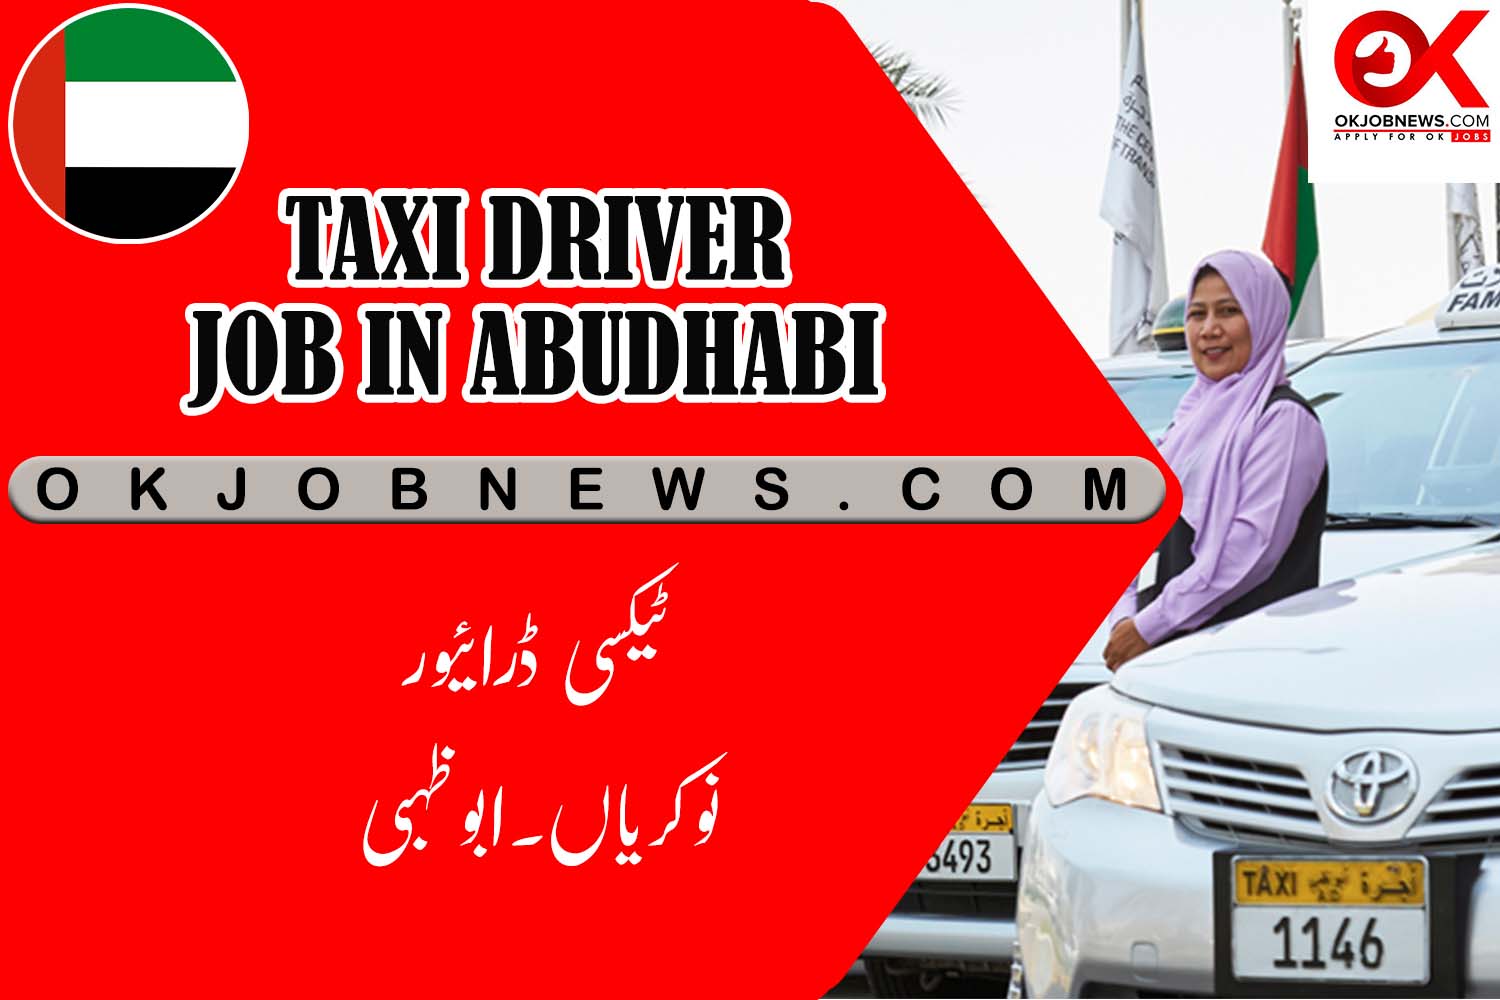 Guide to Landing a Taxi Driver Job in Abu Dhabi